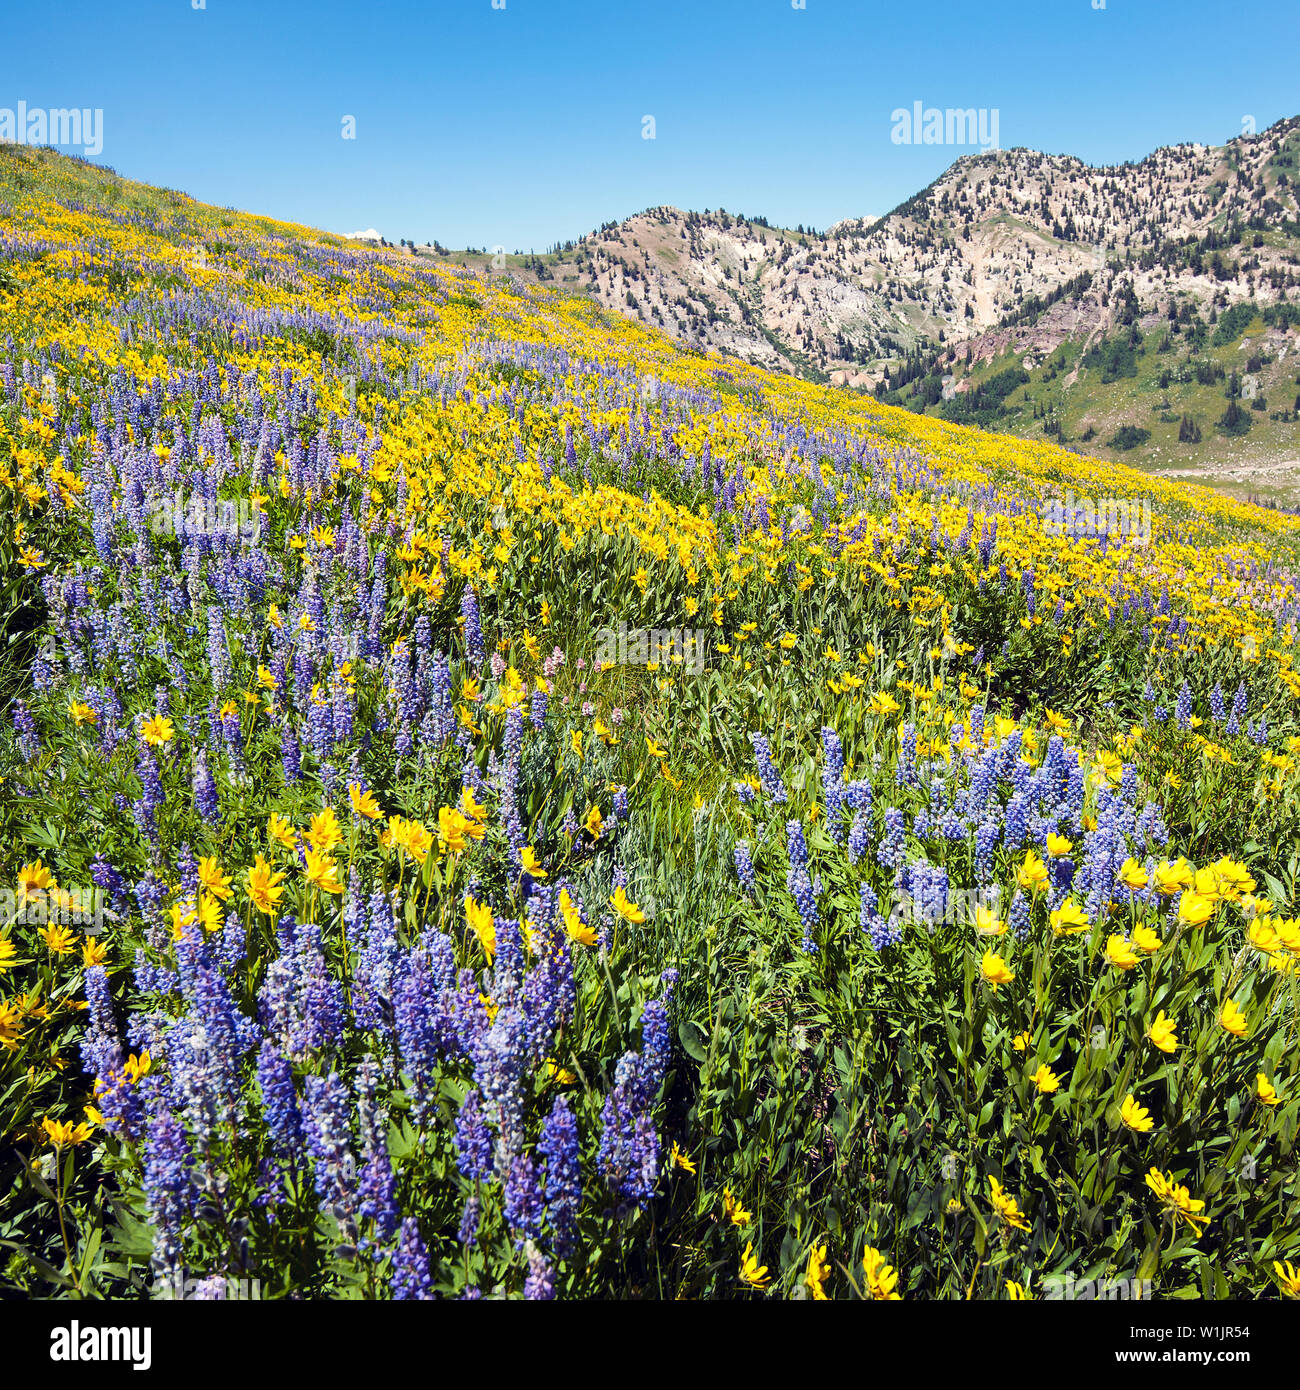 Wildflowers blooming at 9,500 feet eleveation in Greeley Bowl high above Albion Basin at the Alta Ski Area in Little Cottonwood Canyon, Utah. (c) 2015 Stock Photo